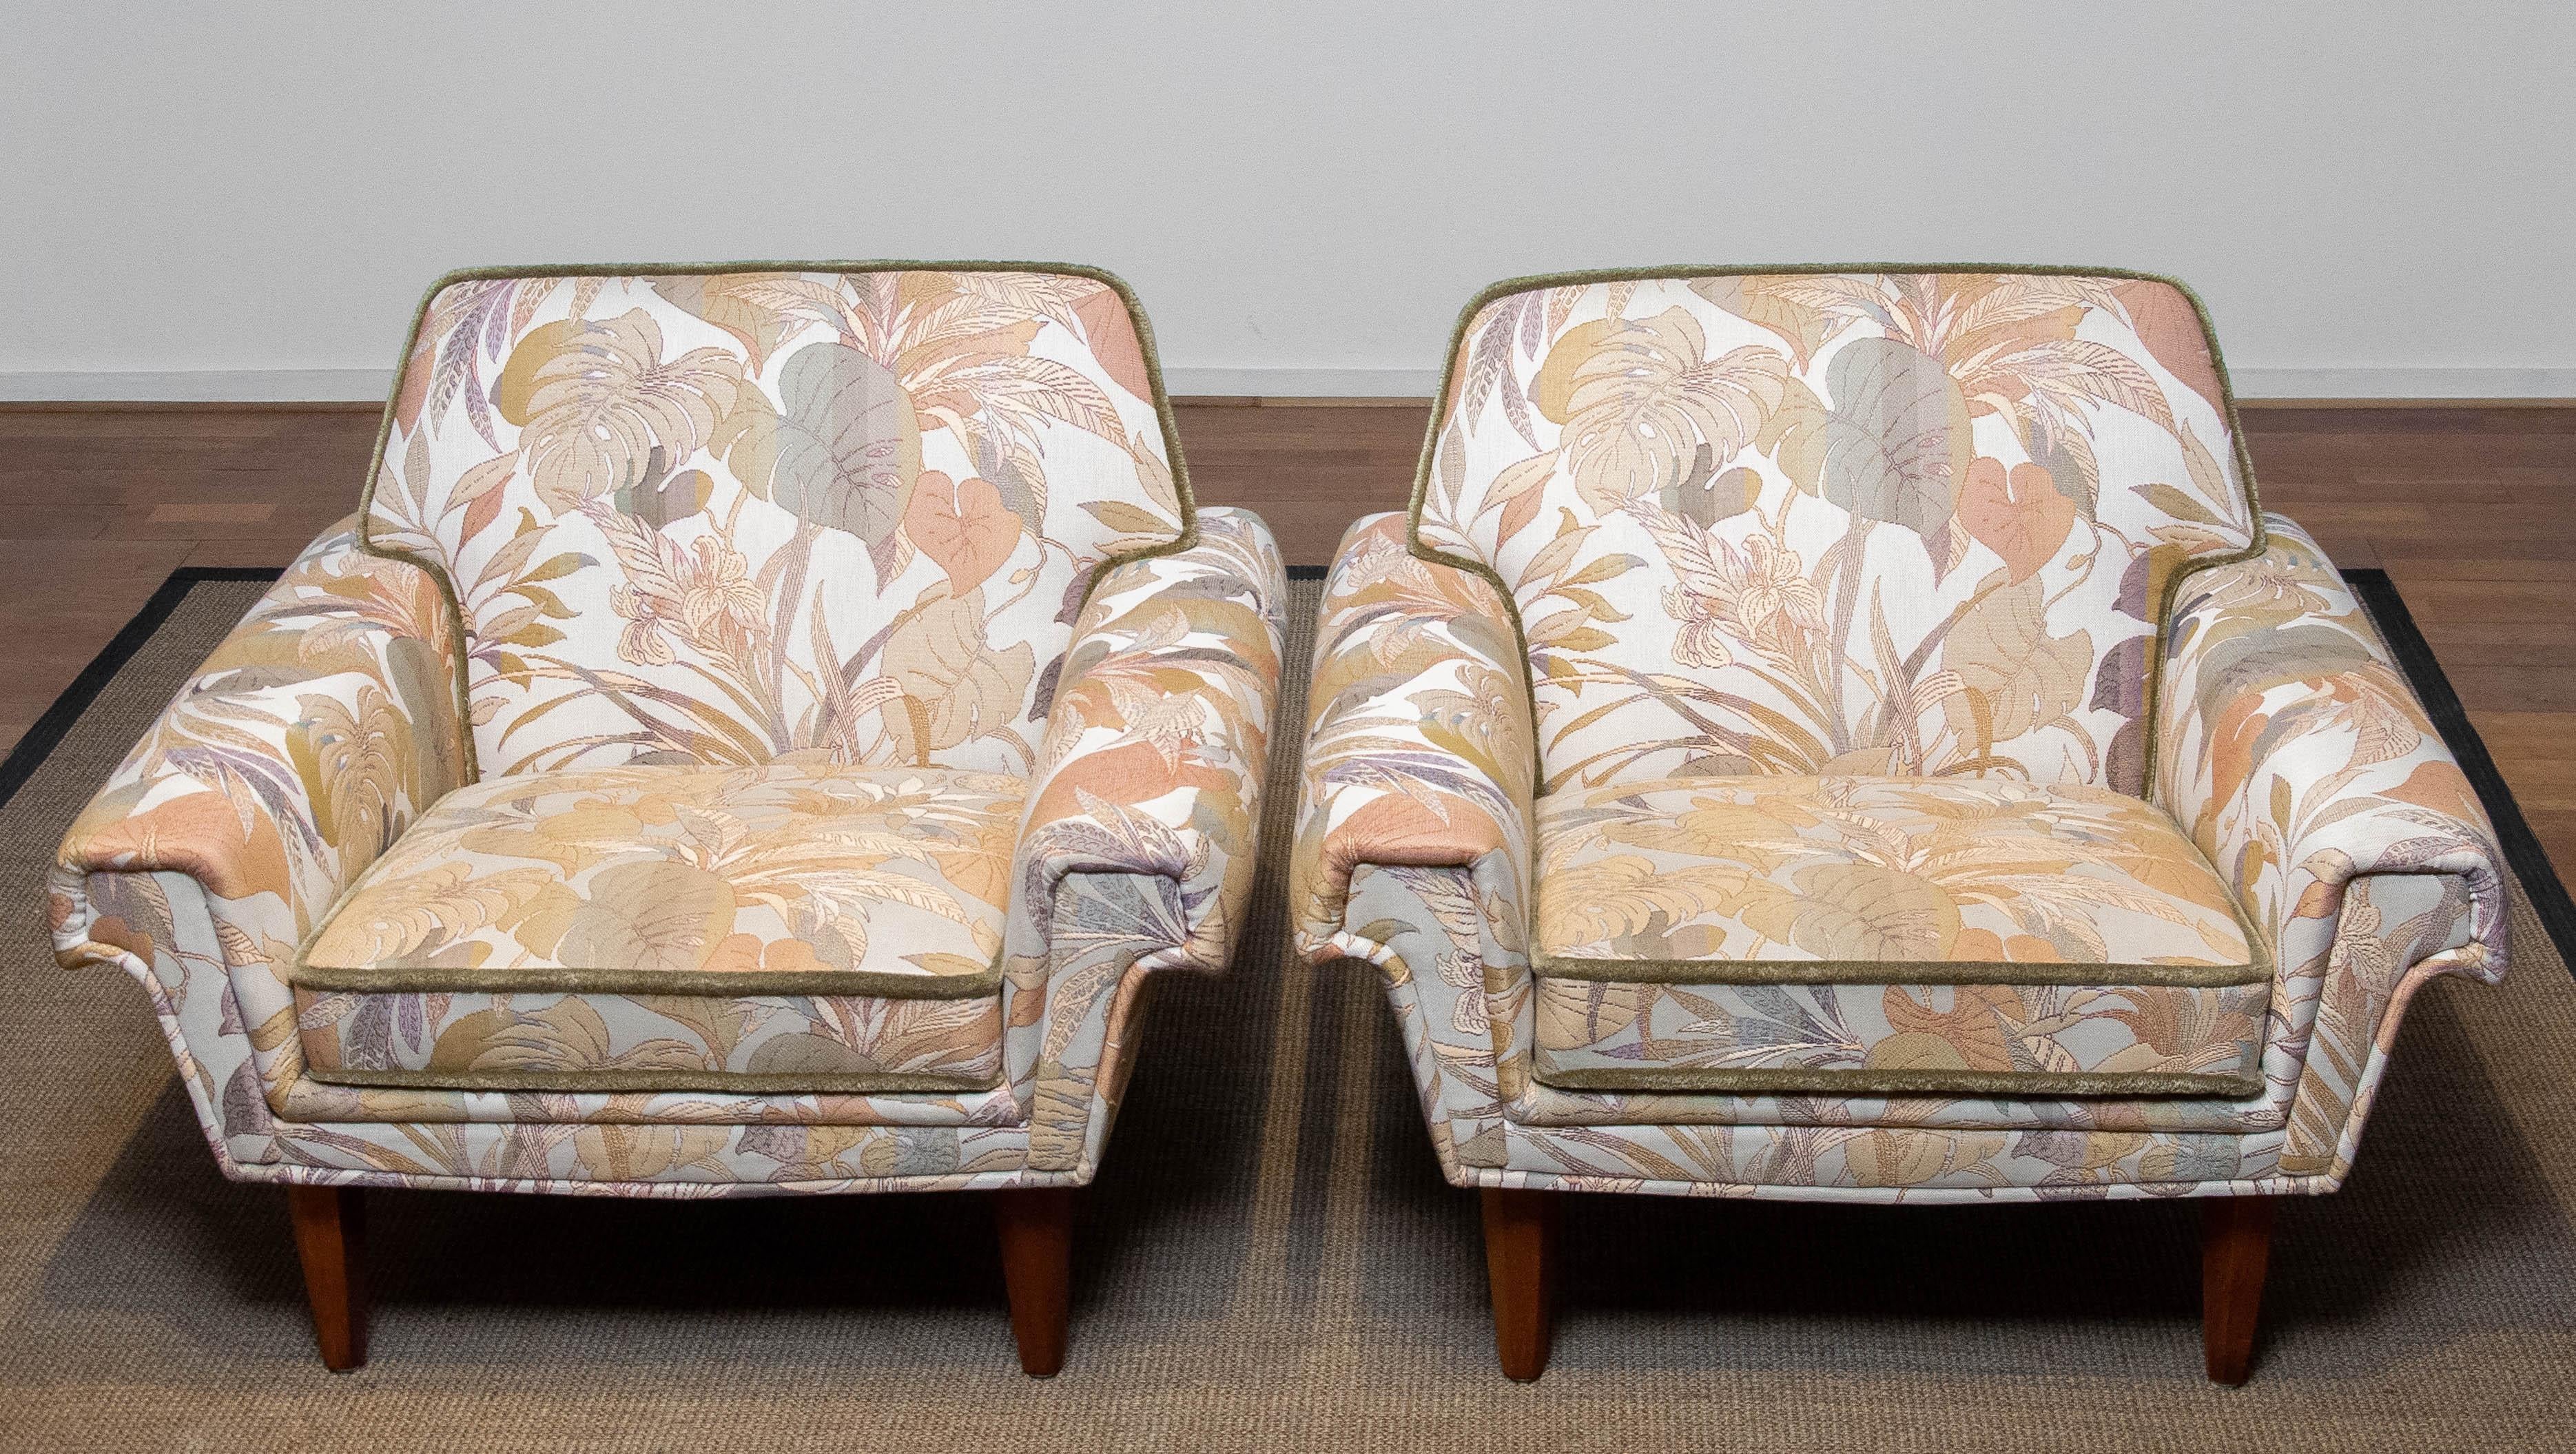 Pair Low Back Lounge Chairs Upholstered Floral Jacquard Fabric From Denmark 1970 For Sale 4